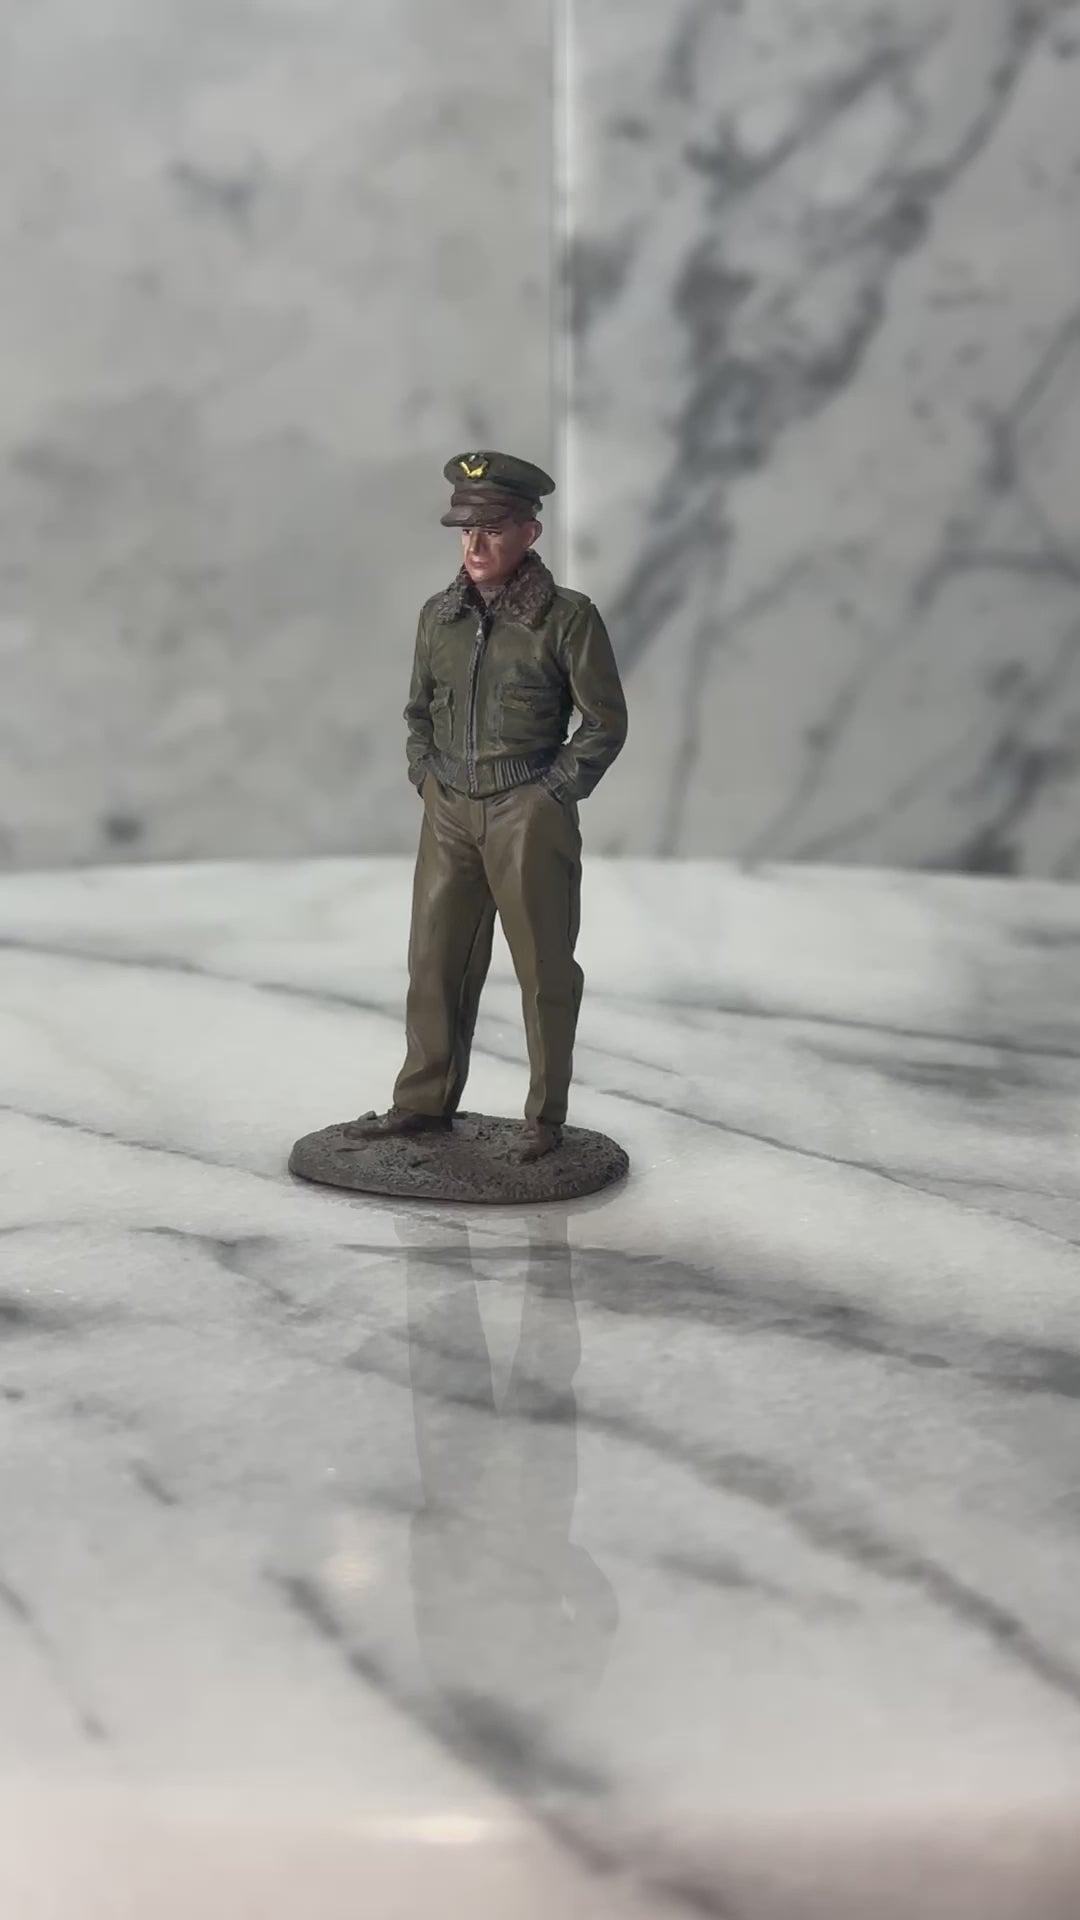 360 view of Toy soldier army men General Dwight D. Eisenhower Winter 1944-45..